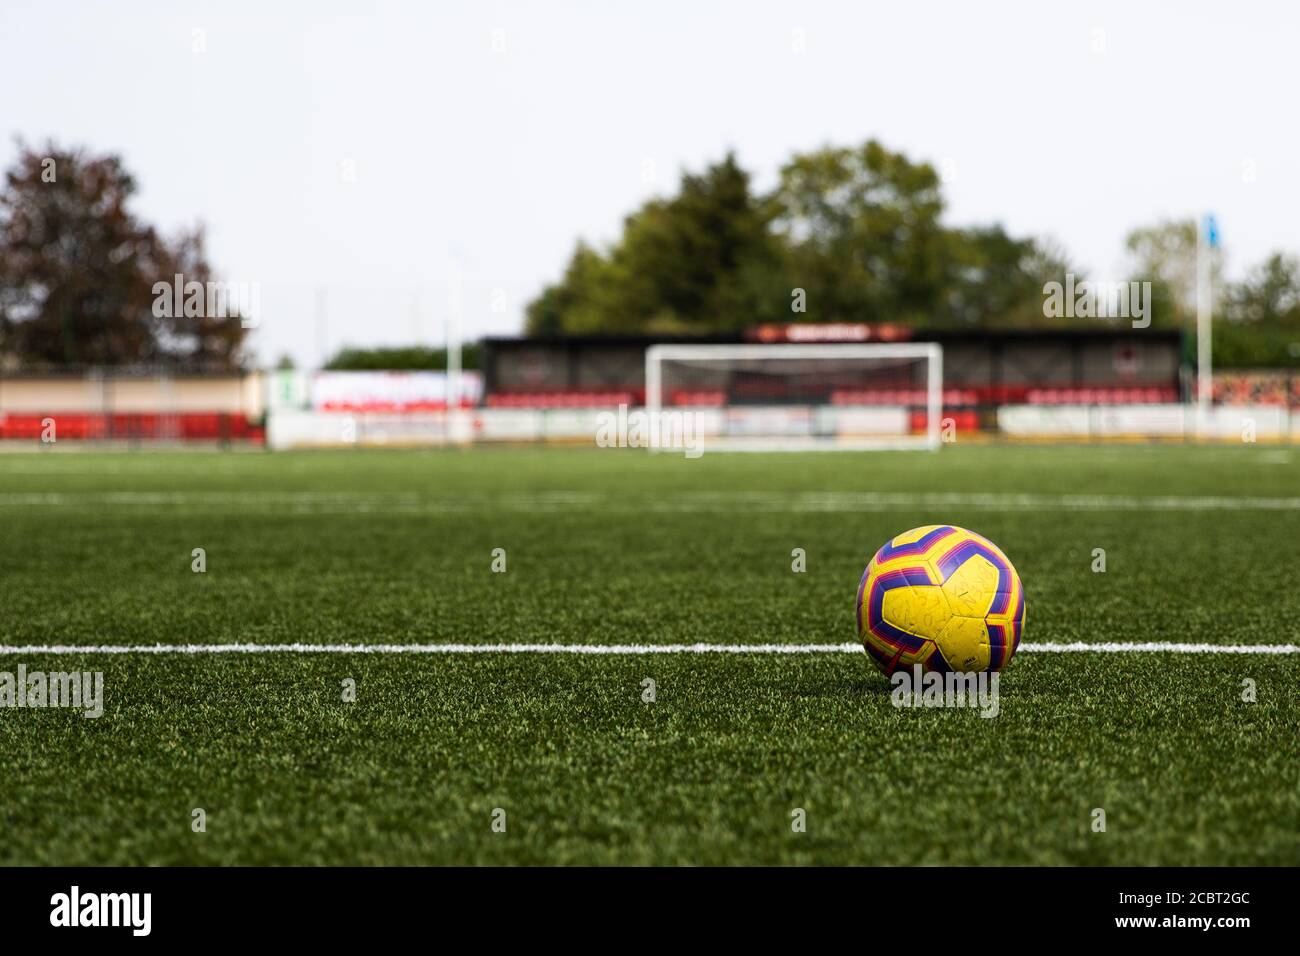 Football on empty 3G football pitch with goal in the background. Ground is Bedfont Sports Ground, London. Stock Photo